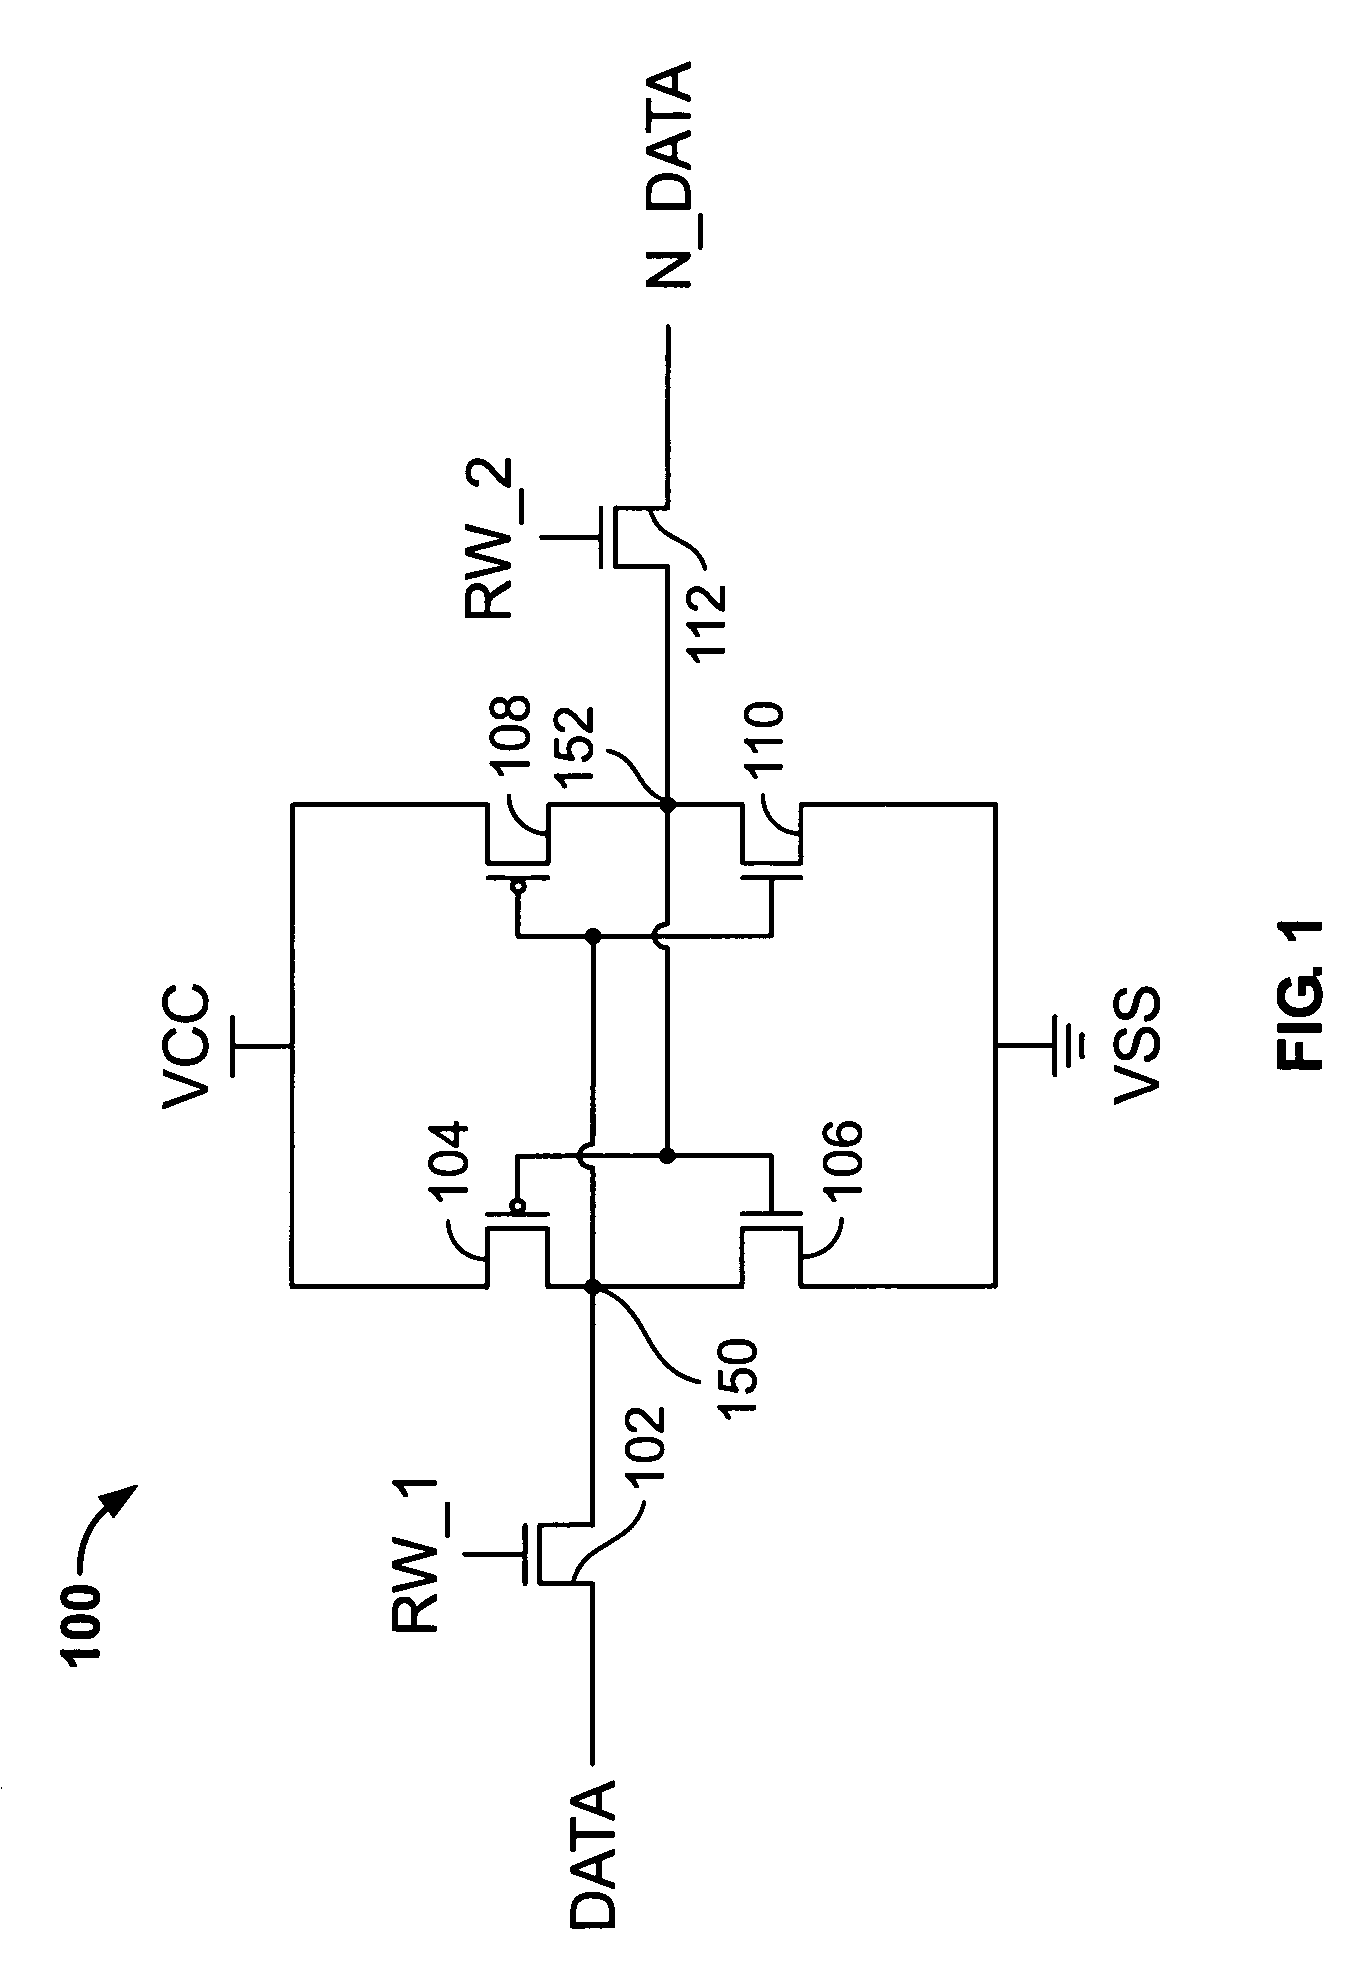 Methods and apparatus for decreasing soft errors and cell leakage in integrated circuit structures